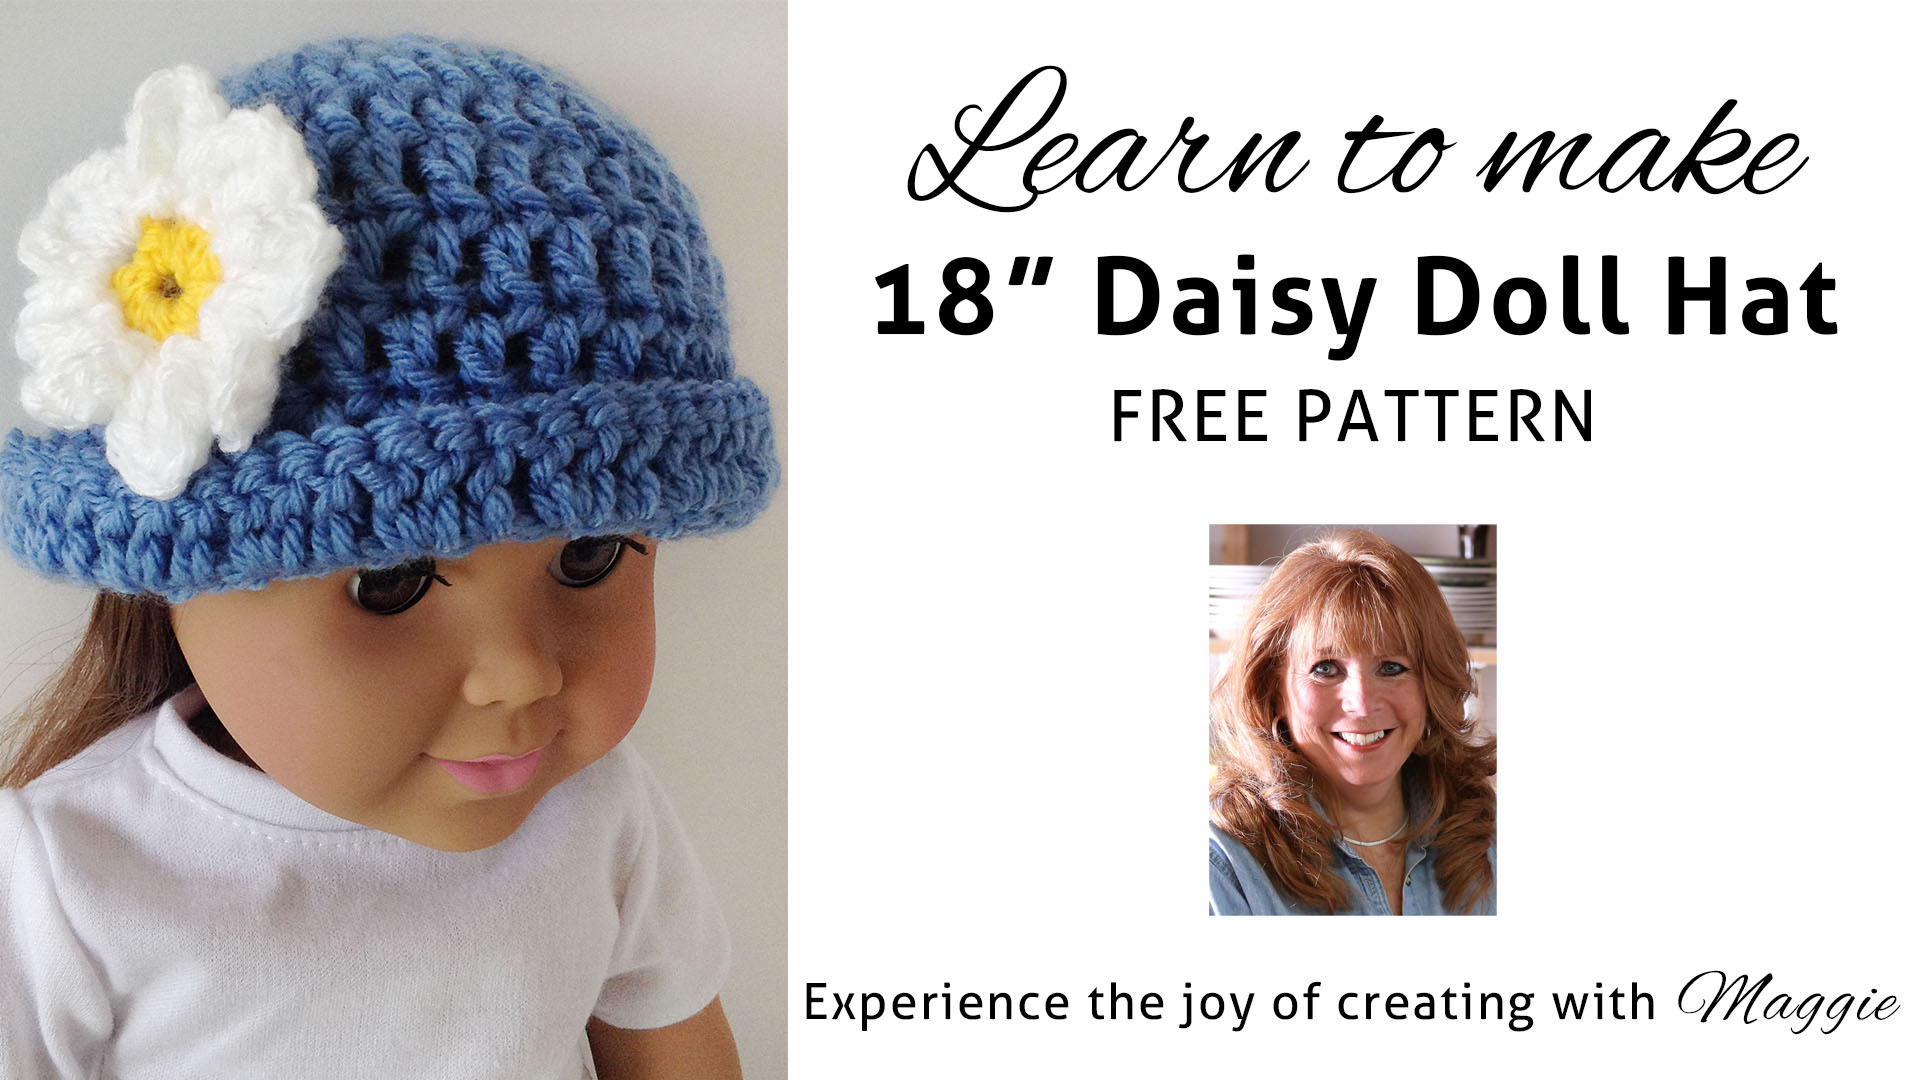 Free Knitting Patterns For Dolls Hats Free Crochet Doll Clothes Patterns For 18 Inch Dolls Doll Hat Free